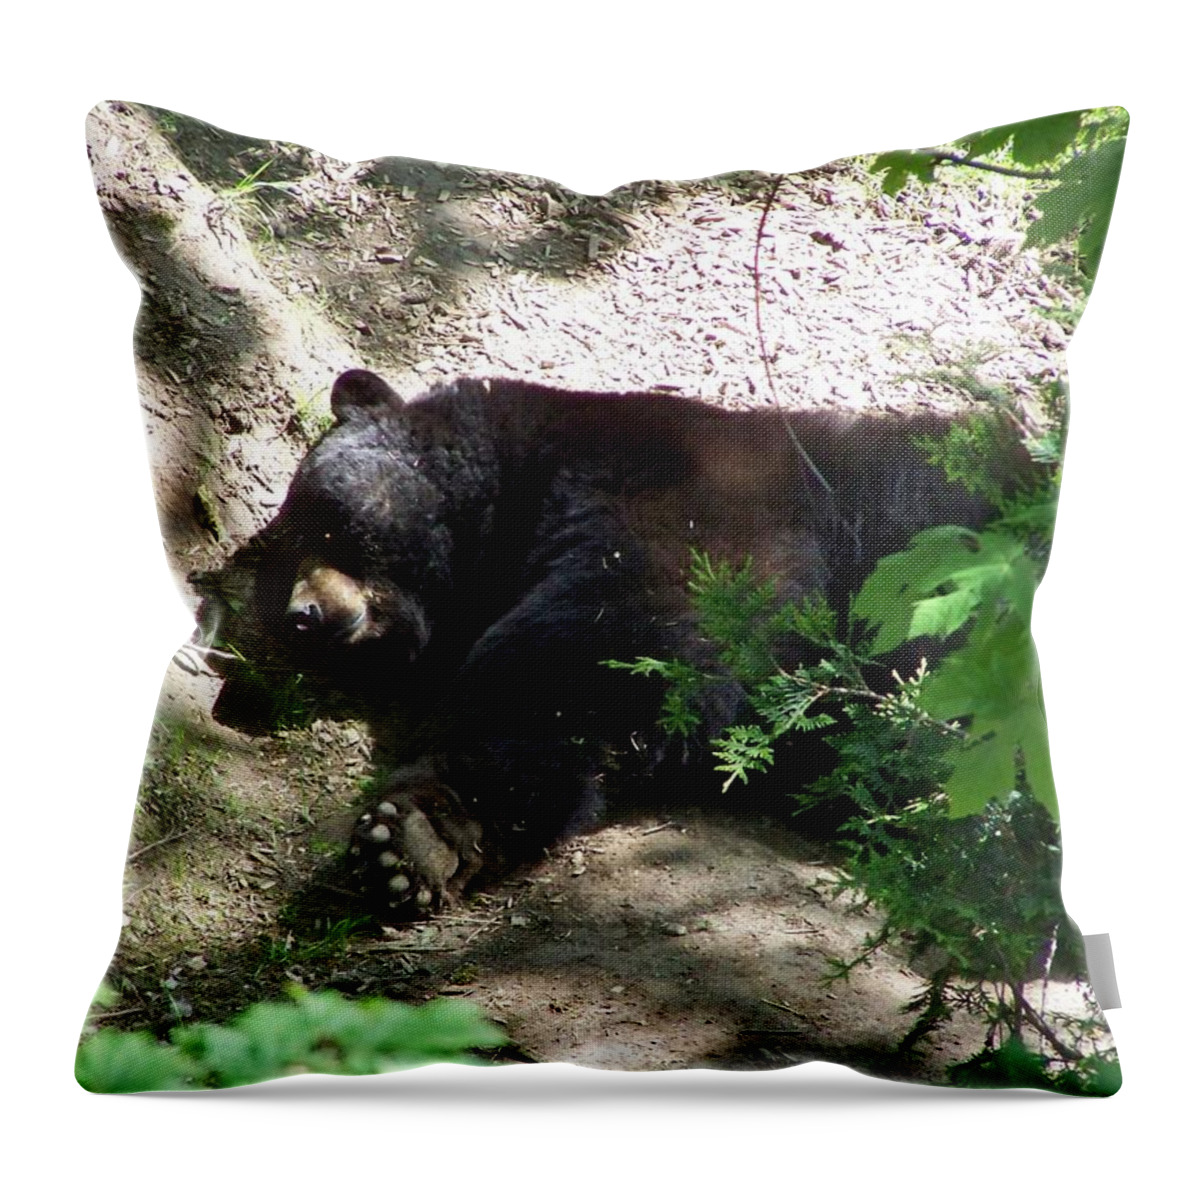 Black Bear Throw Pillow featuring the photograph The Bear 2 by Heather L Wright